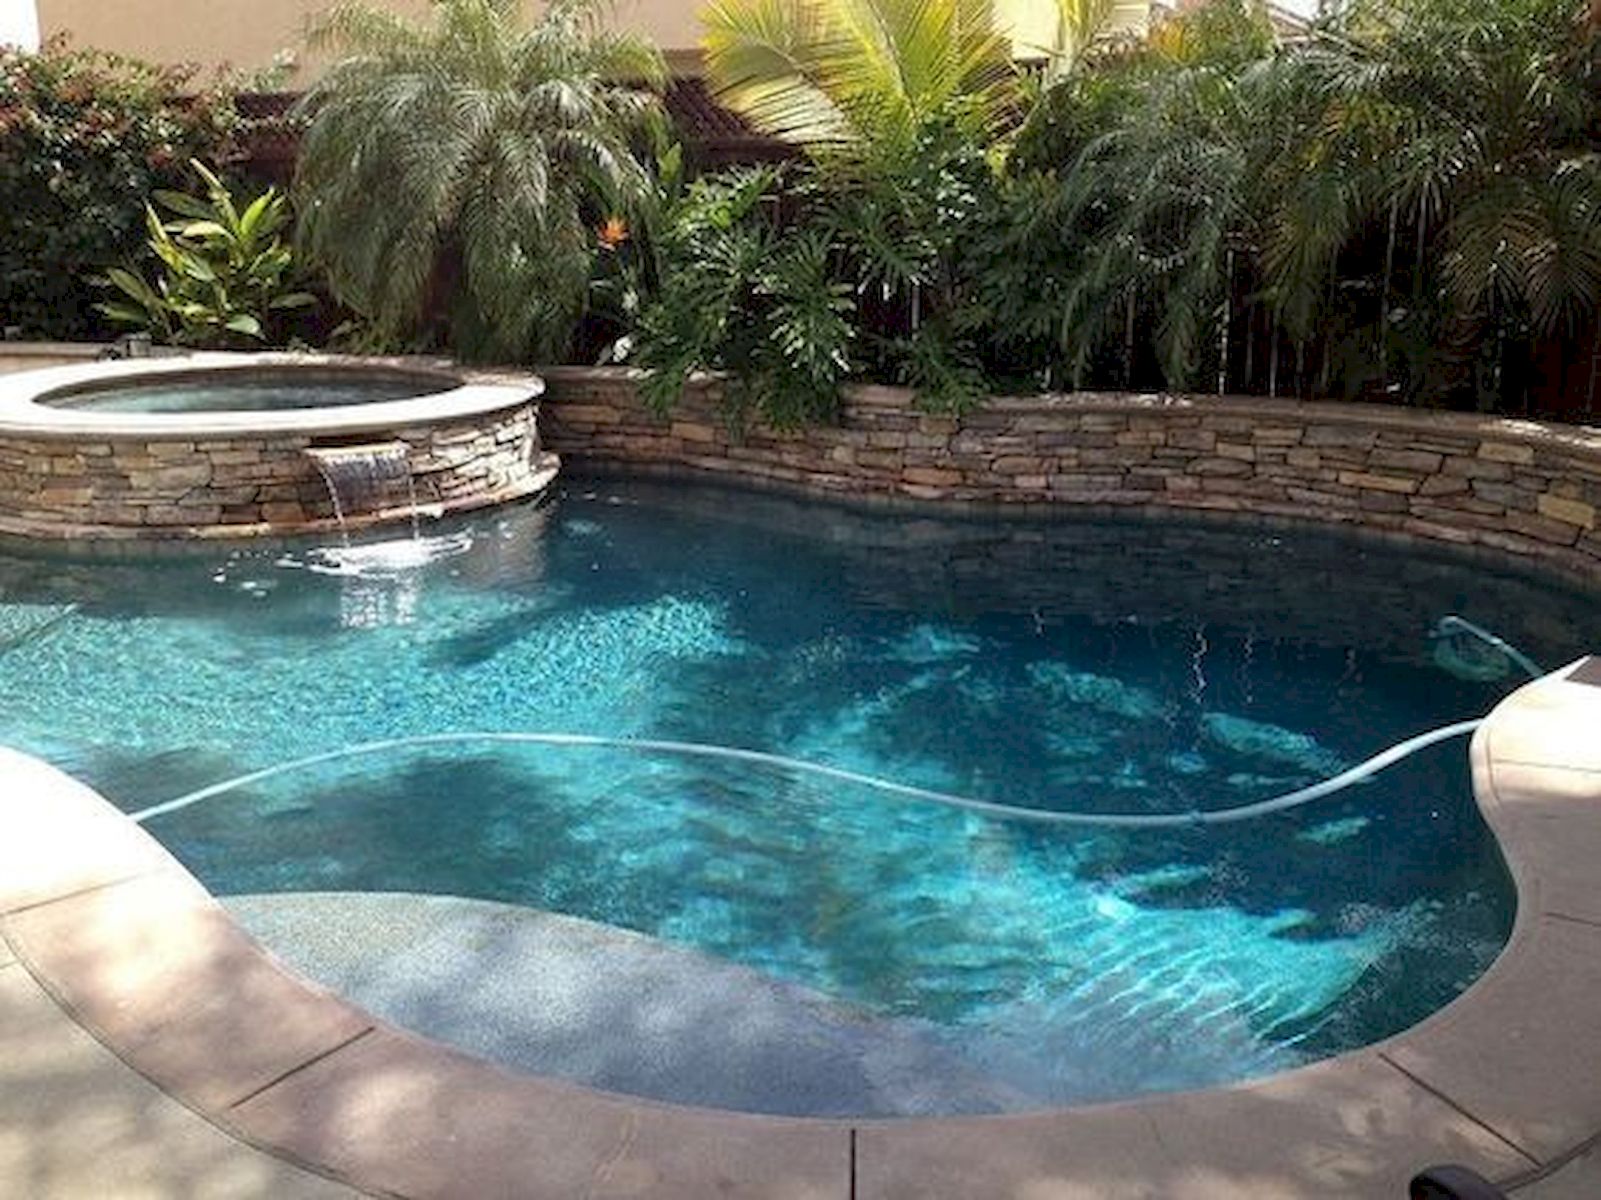 50 Gorgeous Small Swimming Pool Ideas for Small Backyard (45)